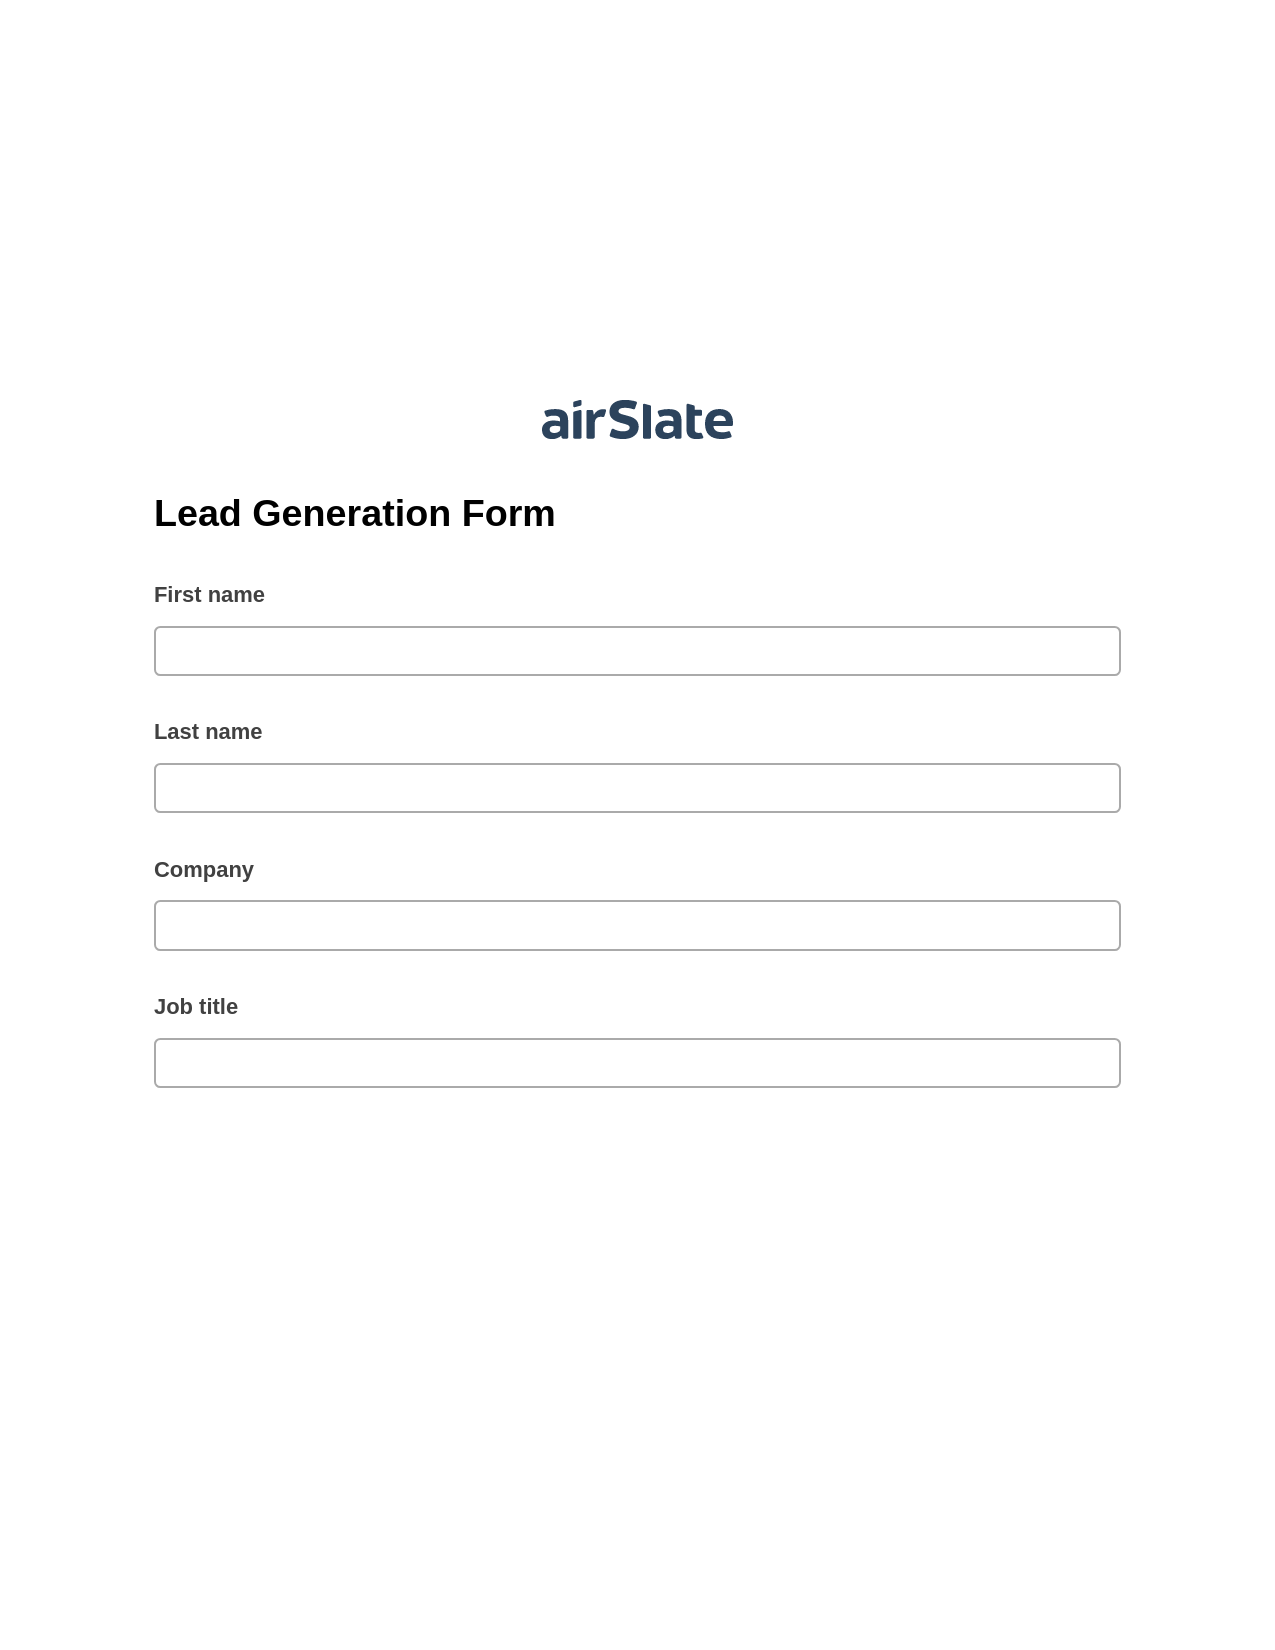 Lead Generation Form Pre-fill from Salesforce Records Bot, Create slate from another Flow Bot, Export to Excel 365 Bot